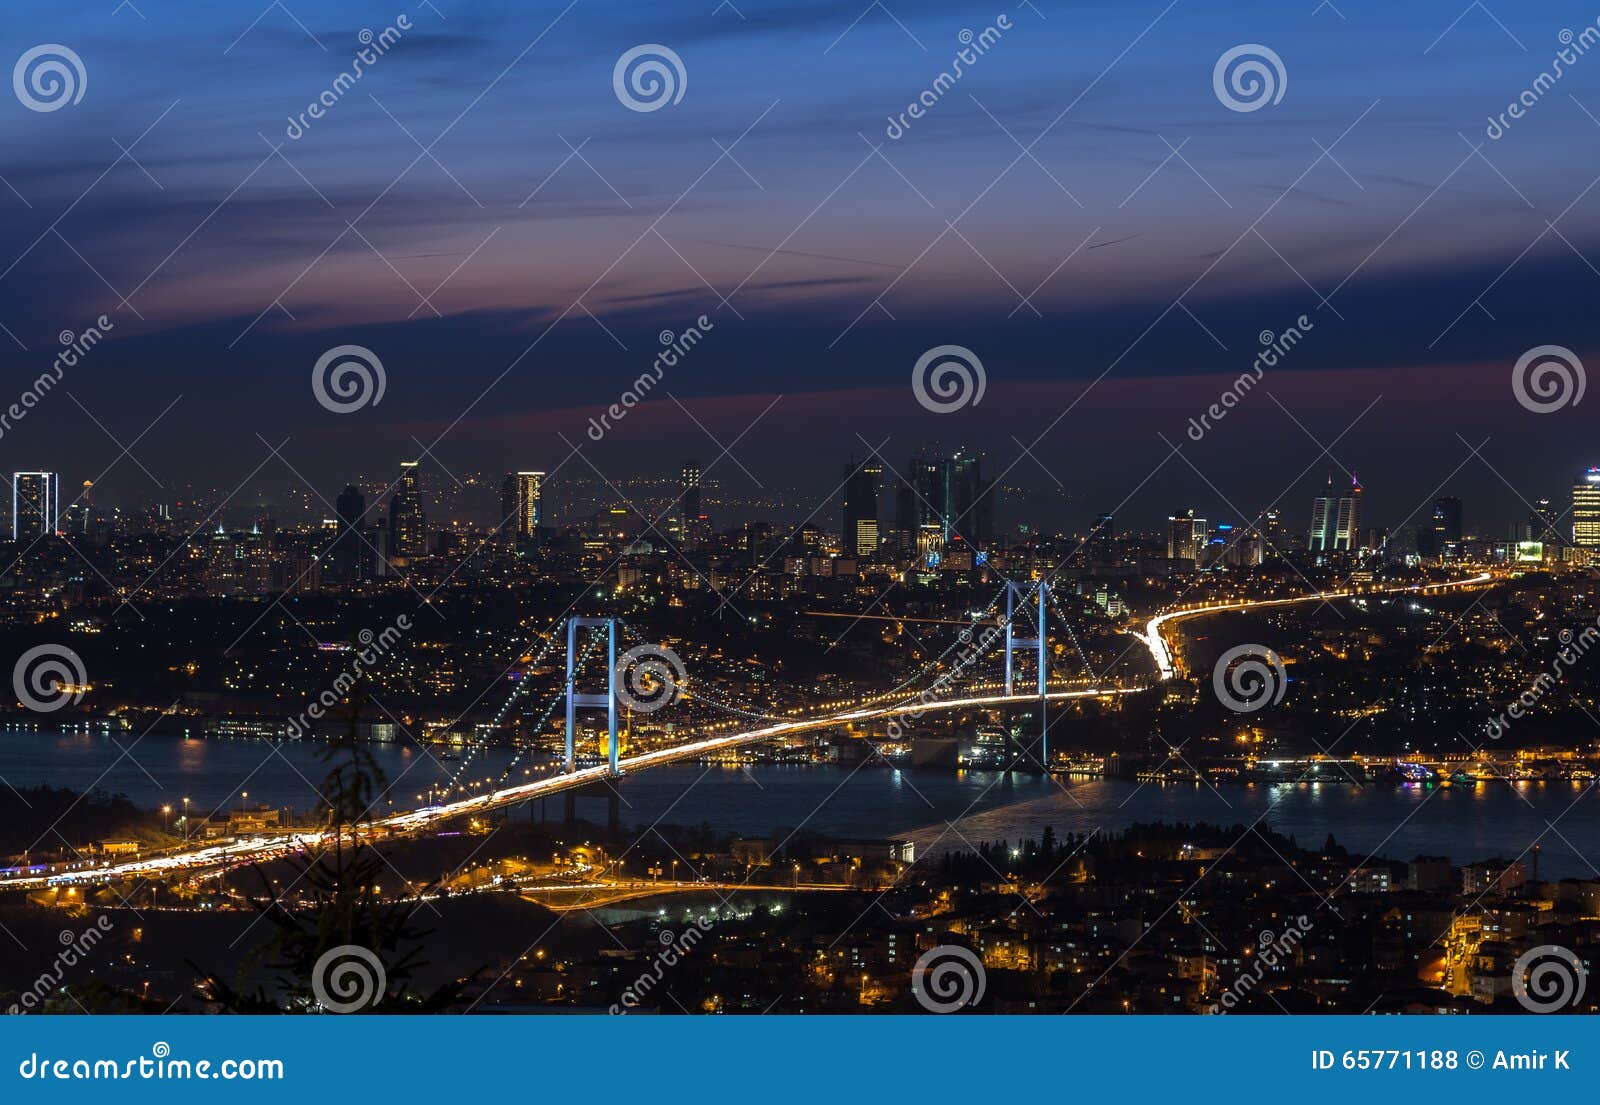 istanbul at night picture